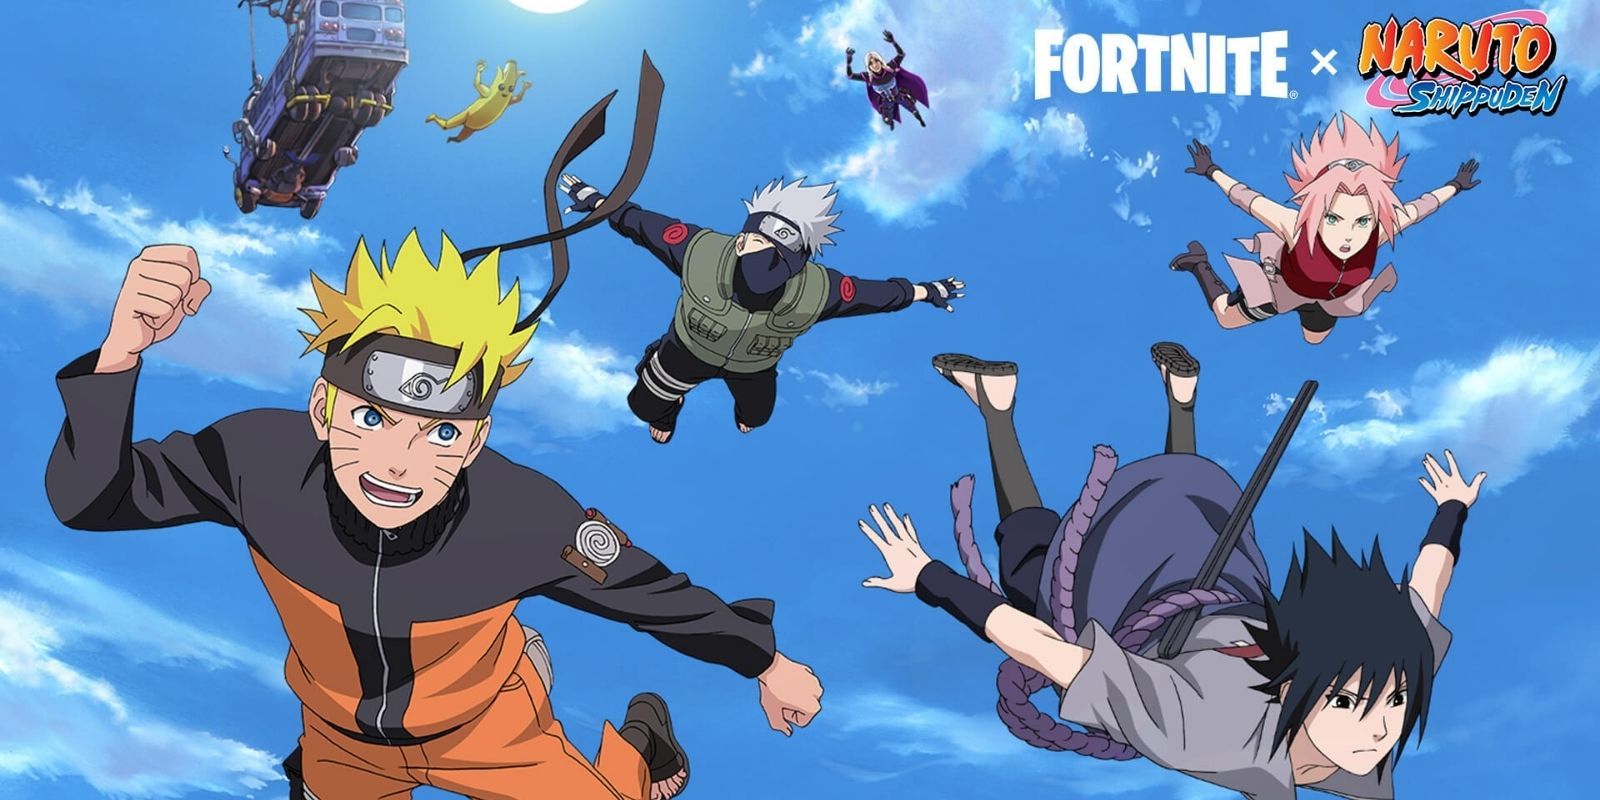 Naruto and his friends dive into action Fortnite